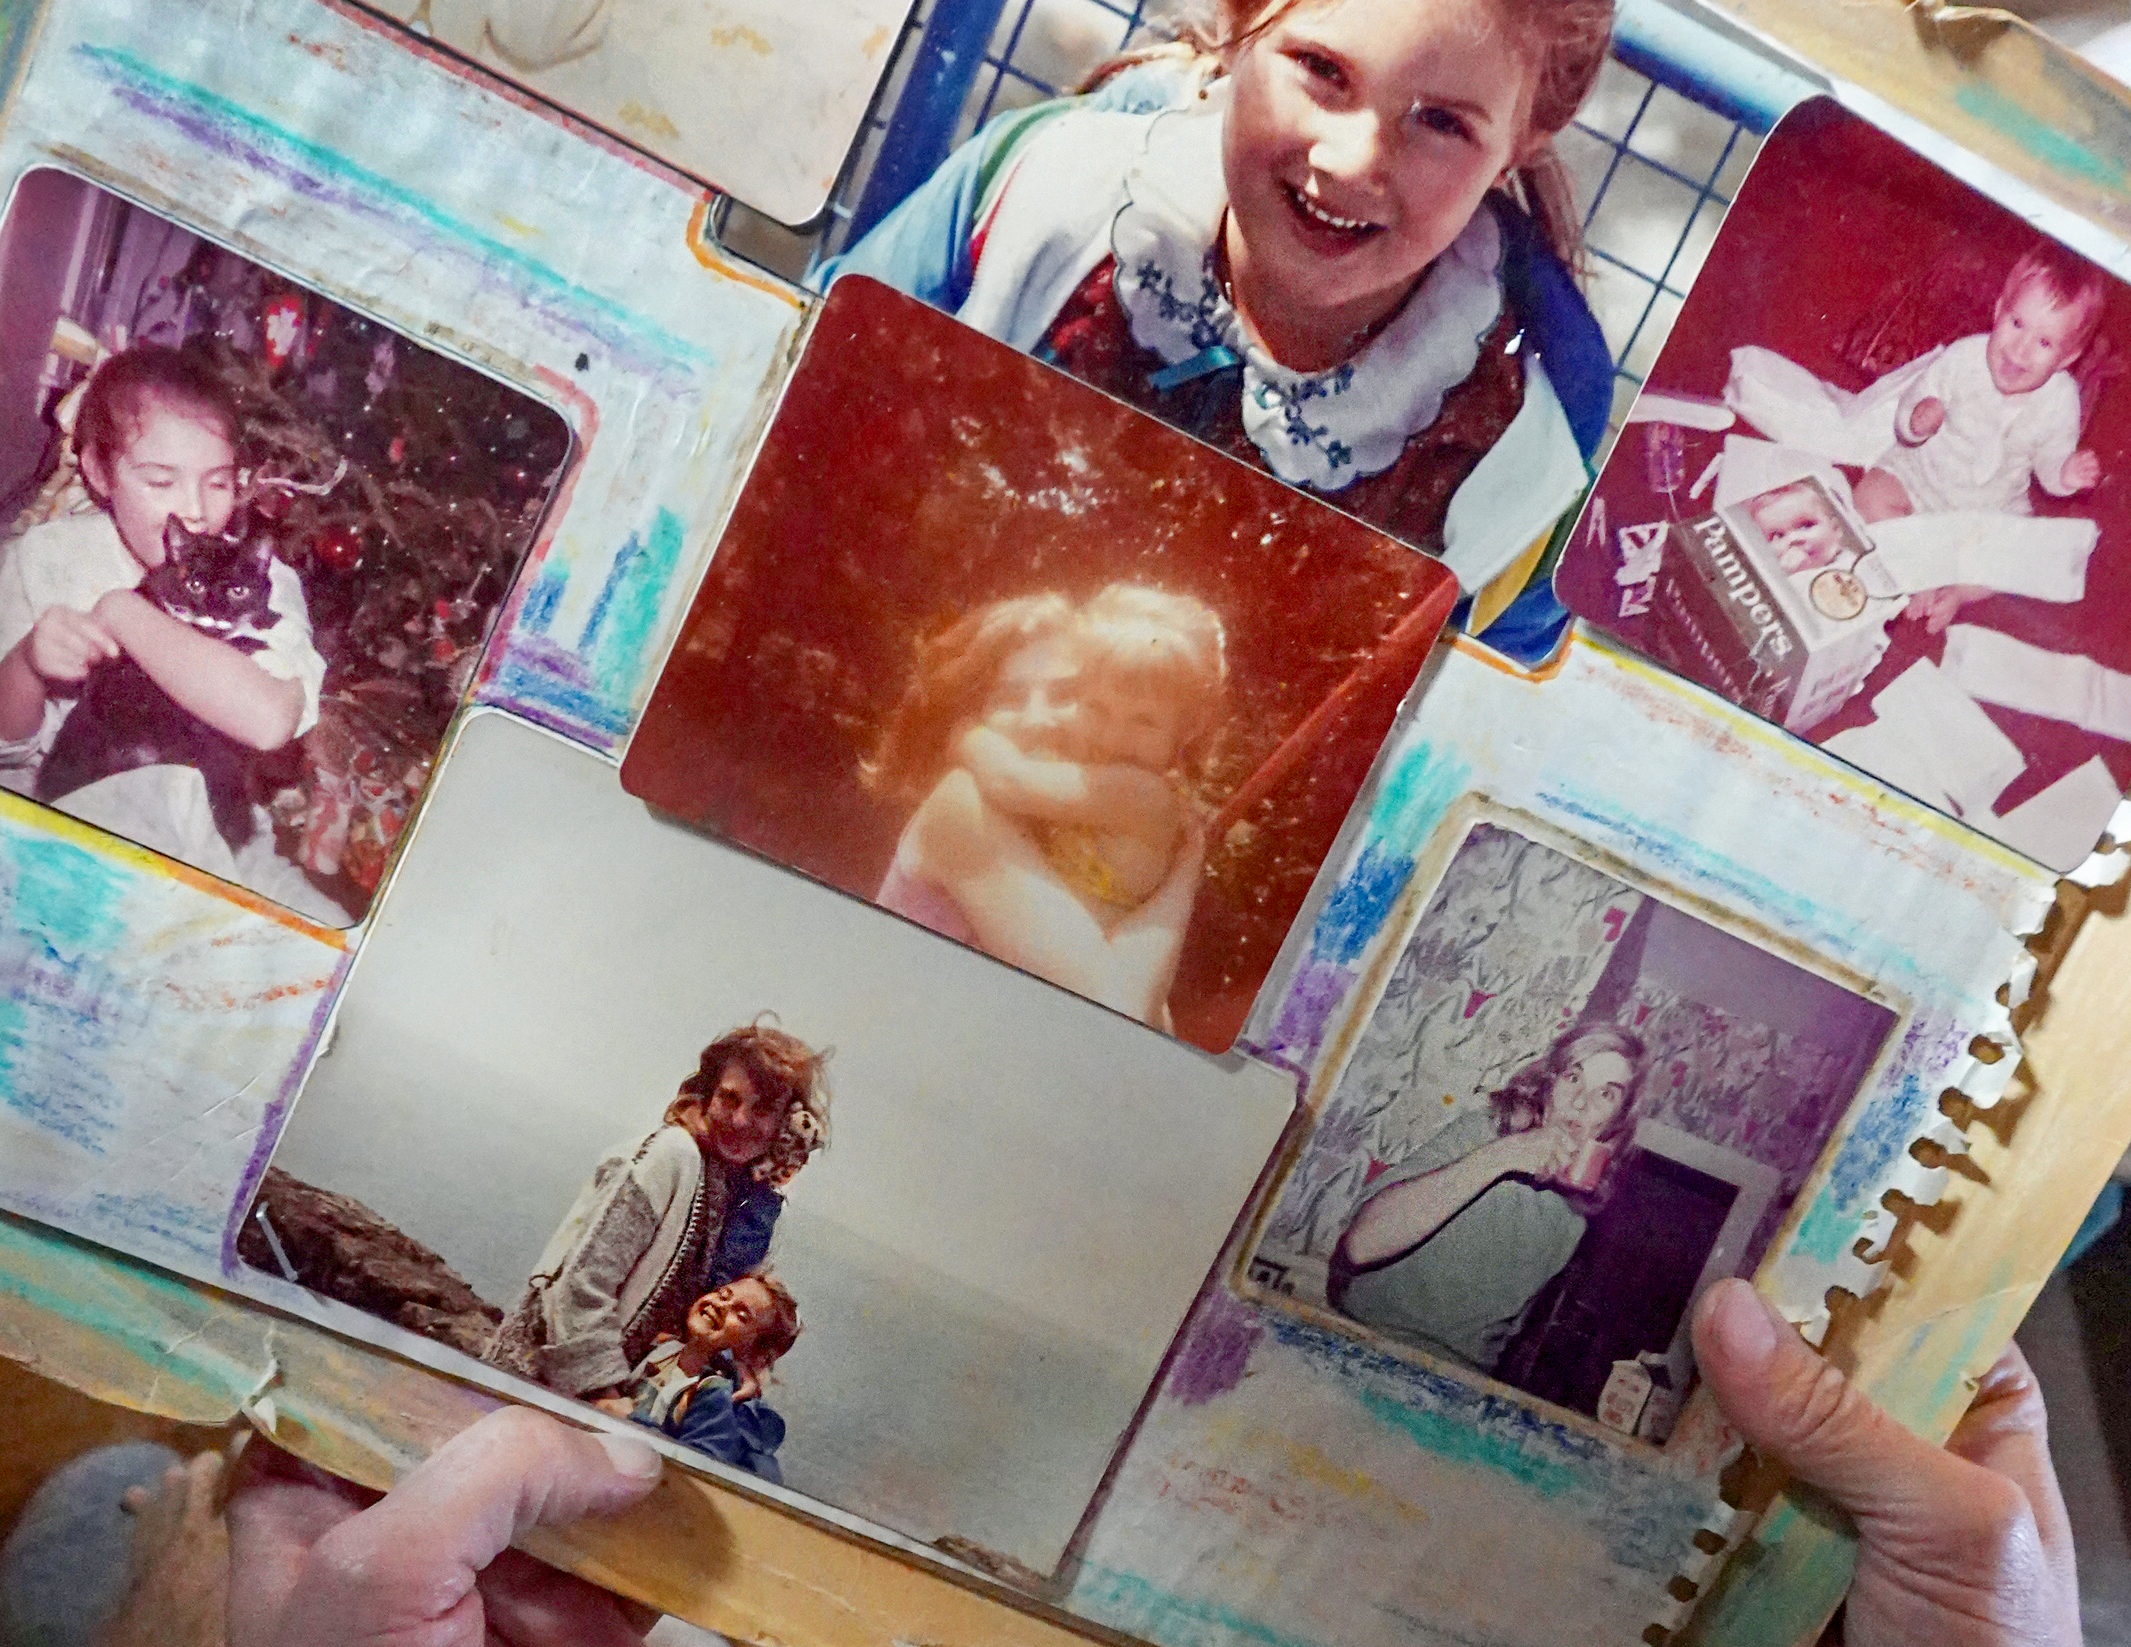 Green holds a thick paper collage with crayon scribbles and six old photos of her with her mother. The central photo is of them embracing tightly when Green was a child. 